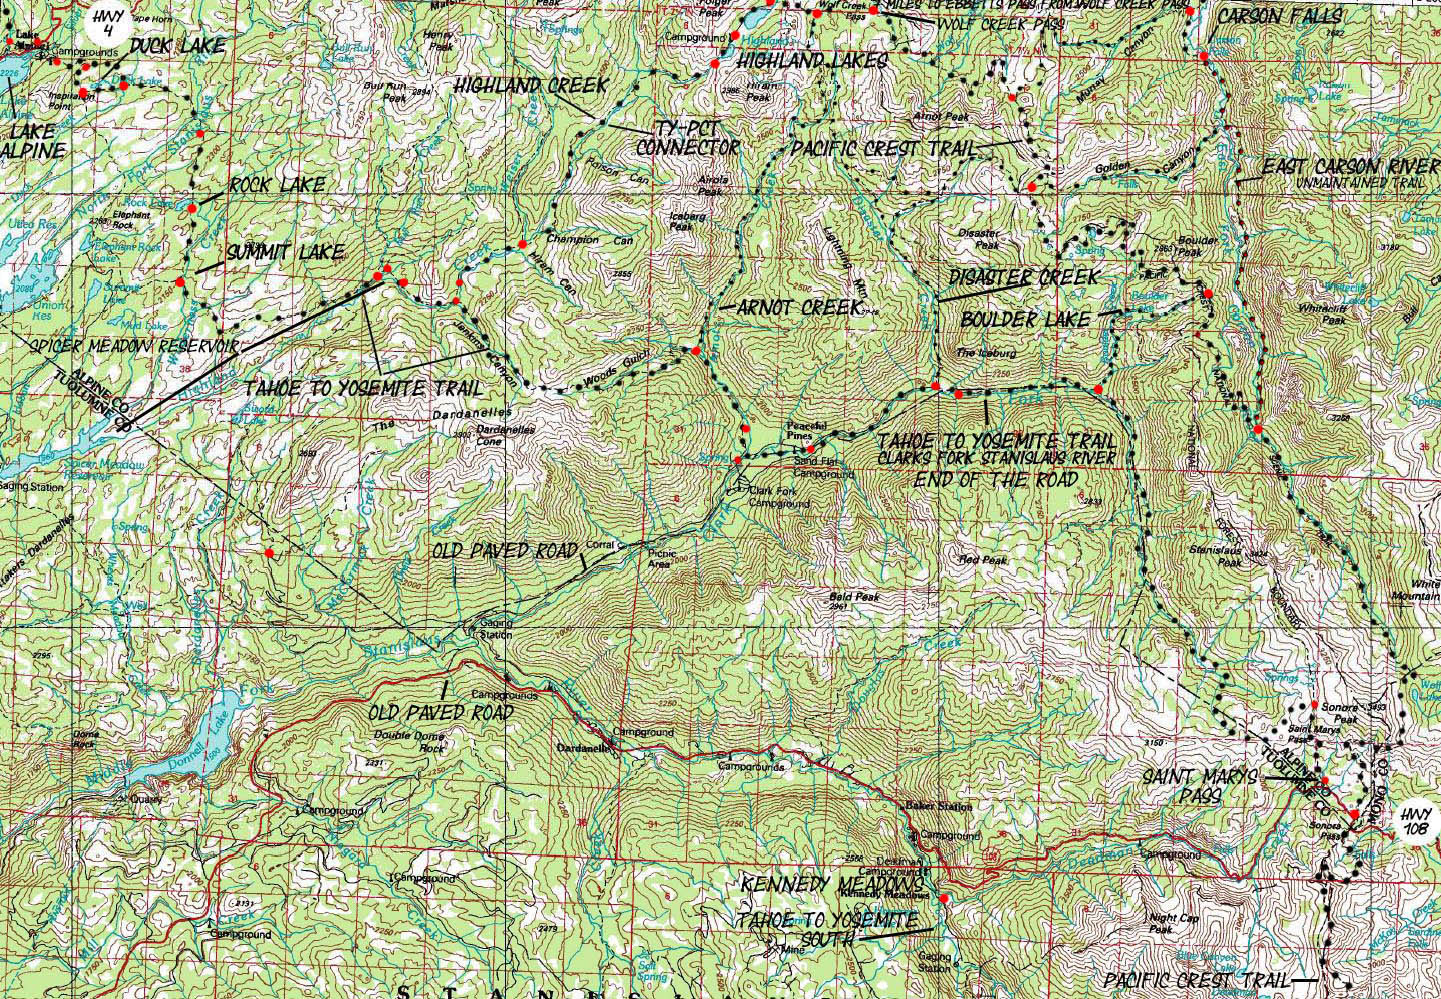 Backpacking map of the Carson Iceberg Wilderness covering the Tahoe to Yosemite and Pacific Crest Trails